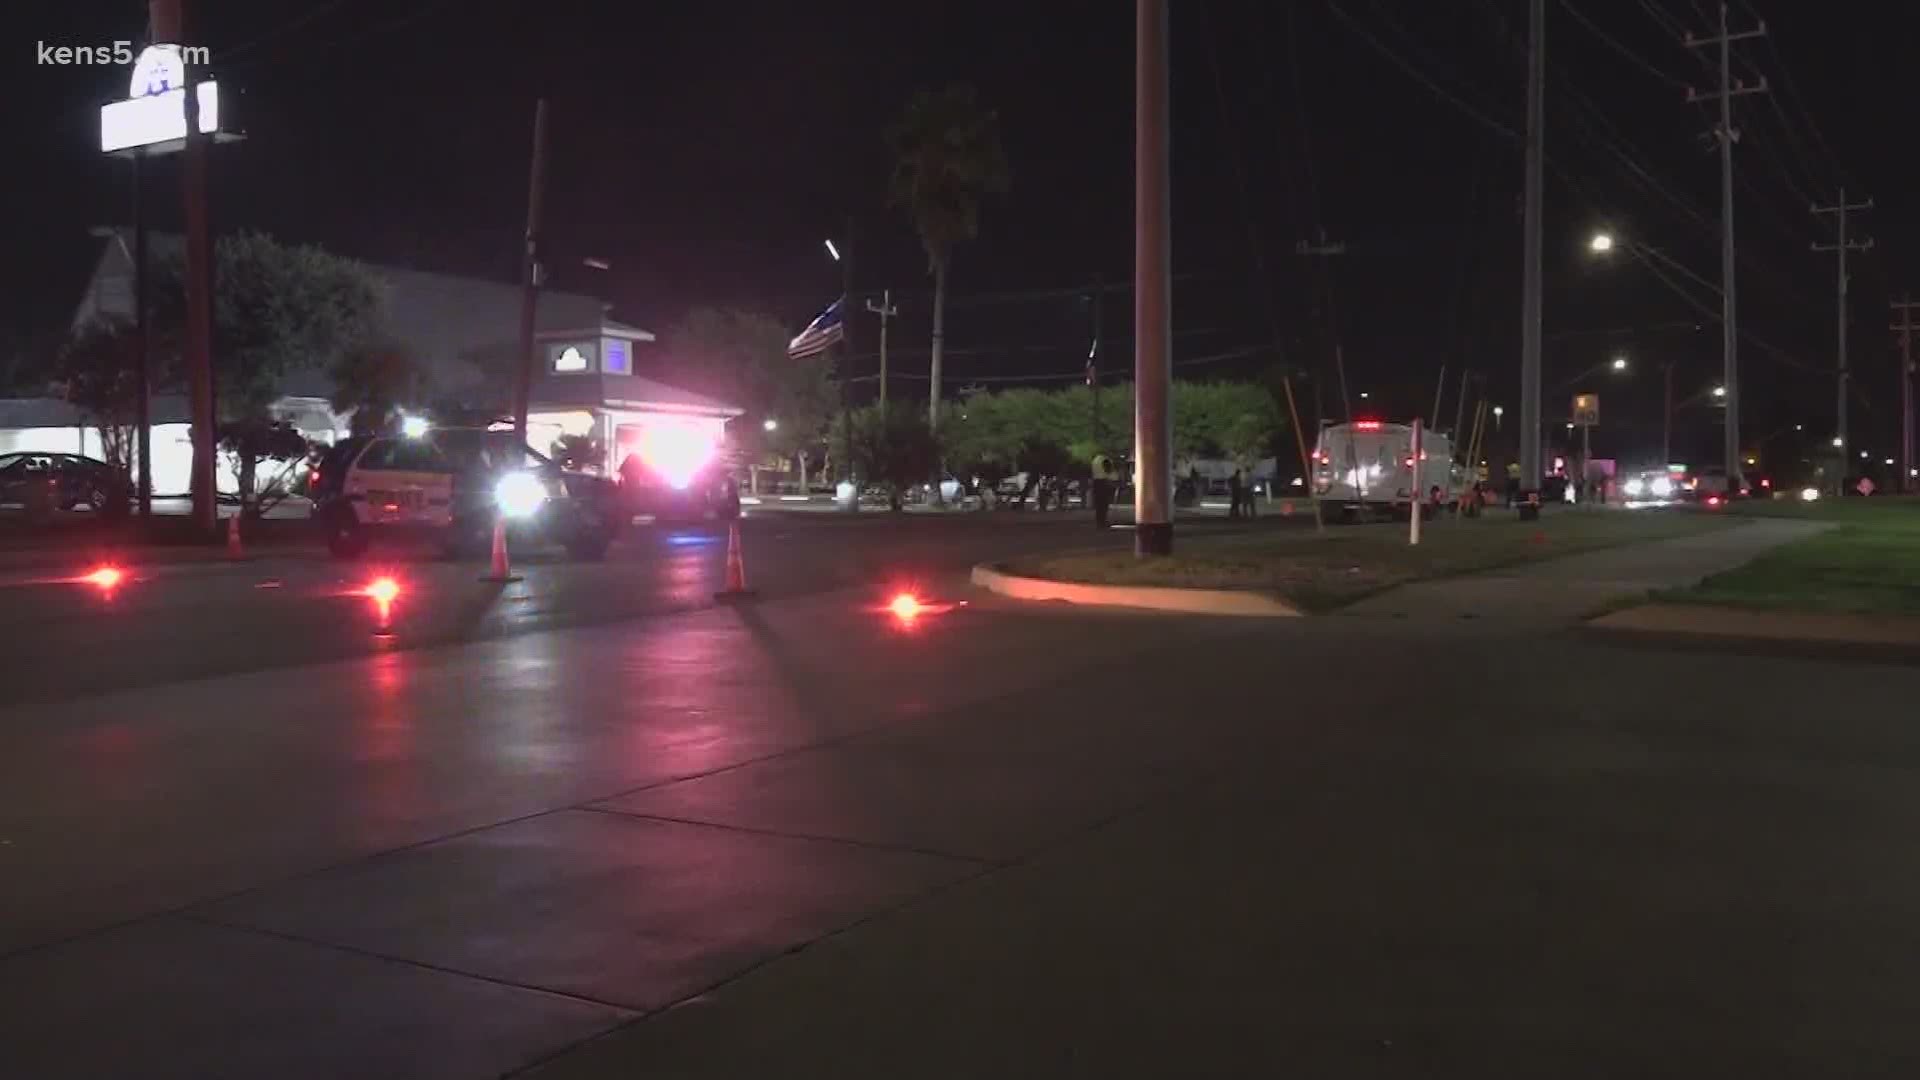 A man is in critical condition after he was hit by a car while walking across an east-side street, San Antonio police said.